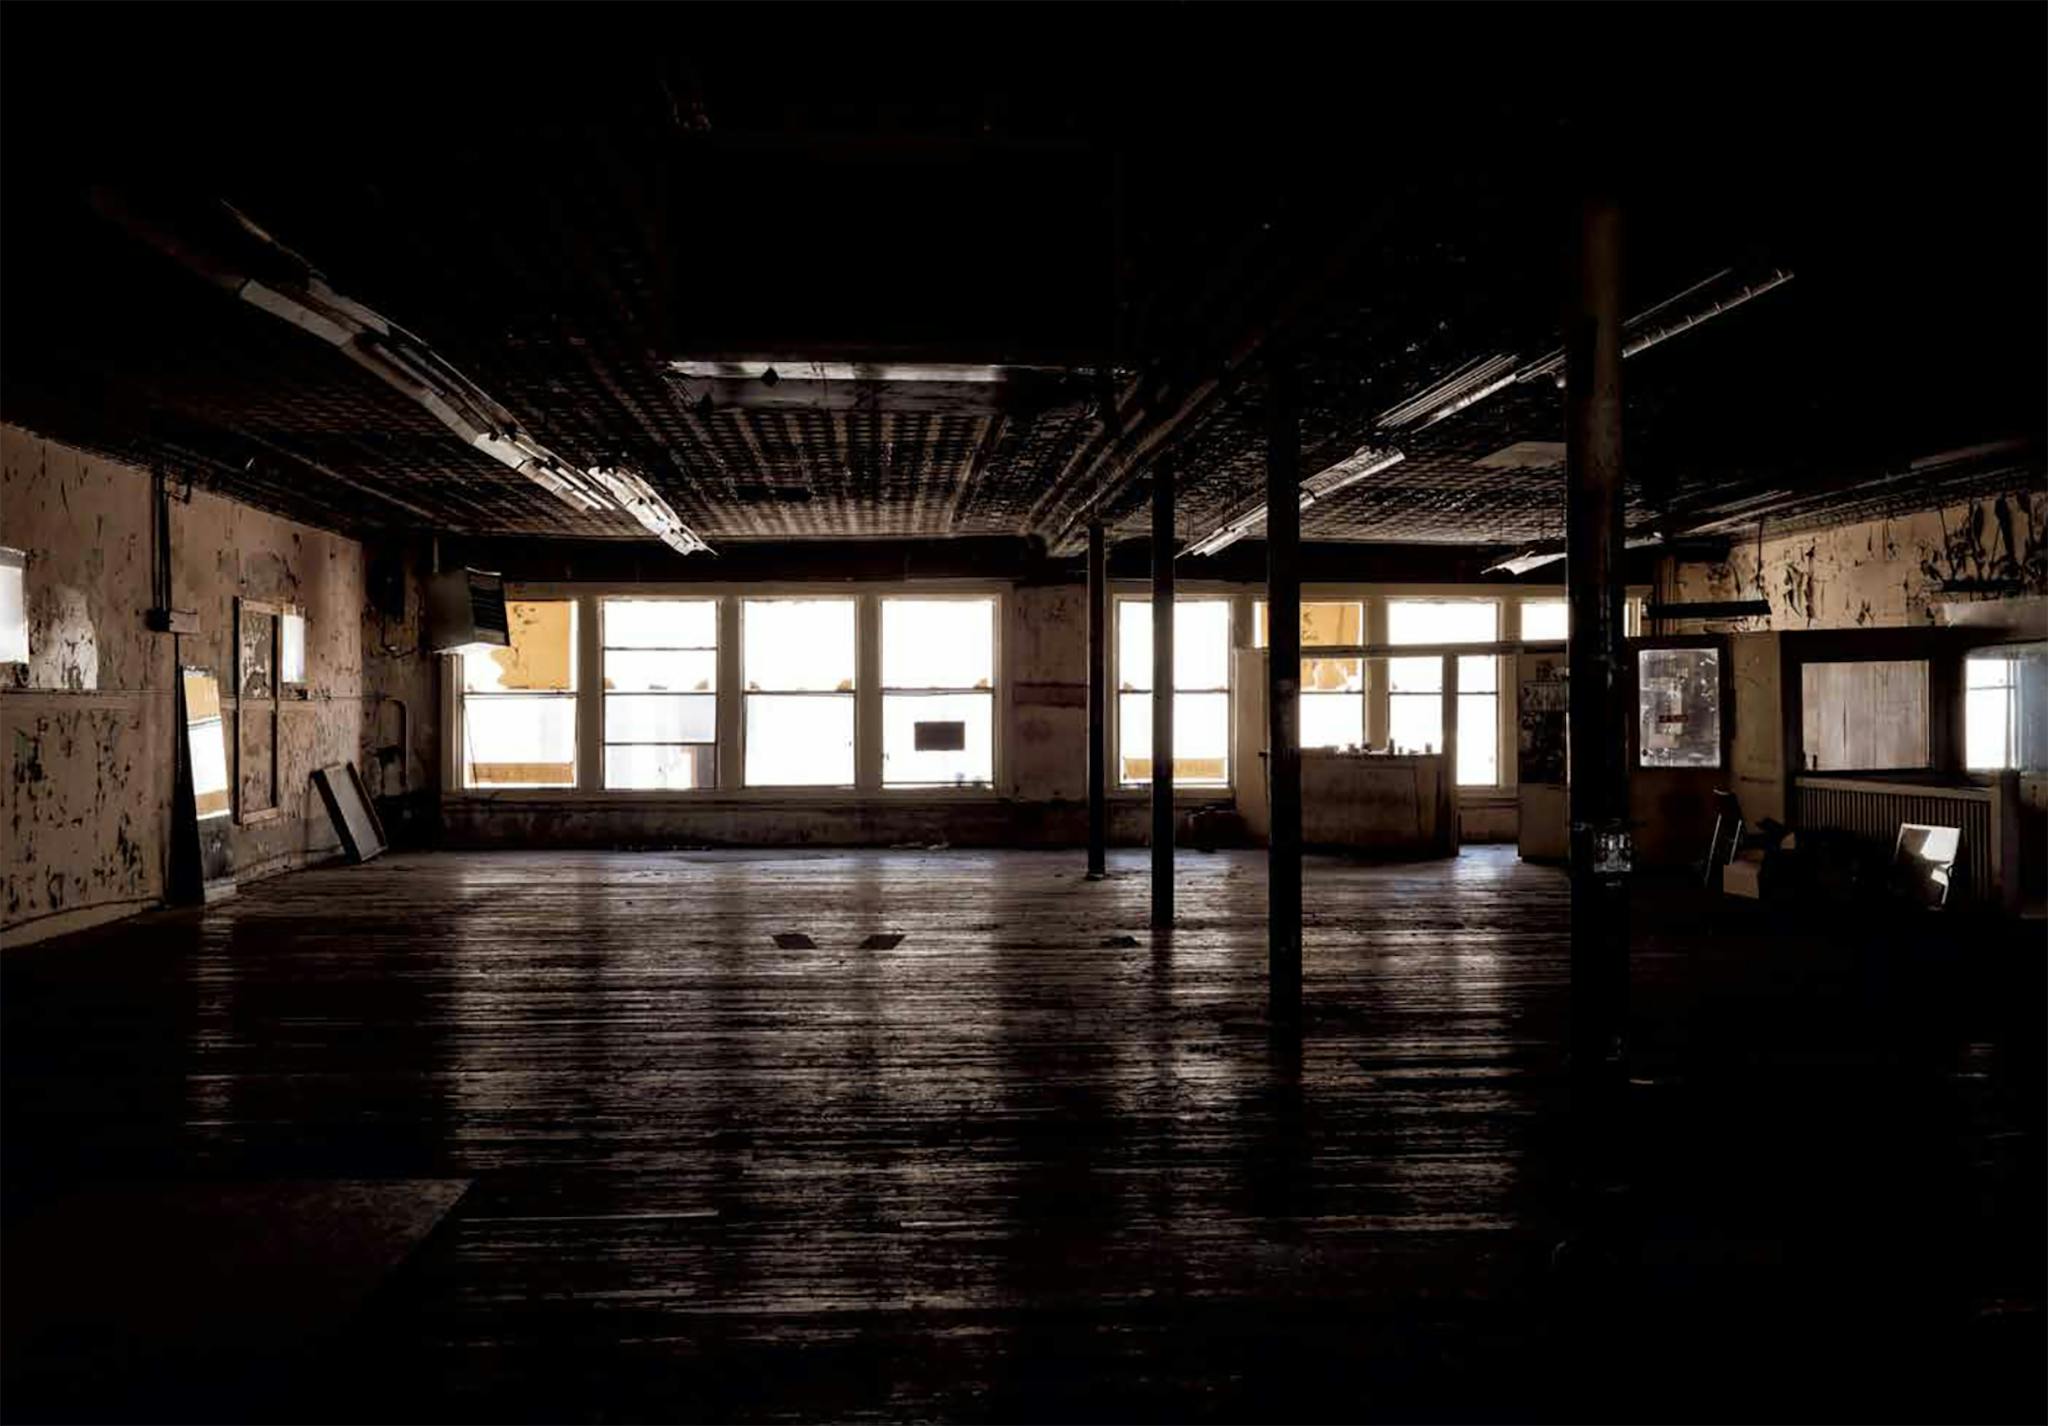 Diamond’s final photo of the gym, taken on April 16, 2018, reveals the first time the space on Commerce Street had been empty since September 1962. A few of the regulars, including one old-timer who’d been working out there from the beginning, showed up to say goodbye as the last of the equipment was being dismantled. They came to show their appreciation for Eidd and for a place aggressively unconcerned with staying up to date, a place that helped people better themselves even as it continued to deteriorate. Eidd, now 89, had the equipment moved to the backyard of the home he shares with one of his sons, an hour outside of Forth Worth. In the warmer weather, some of Doug’s regulars stop by, work out, catch up. Downtown Dallas continues to change but the second-floor space that once held Doug’s Gym sits empty. The sign still hangs where it always has, over the street, seemingly weightless.